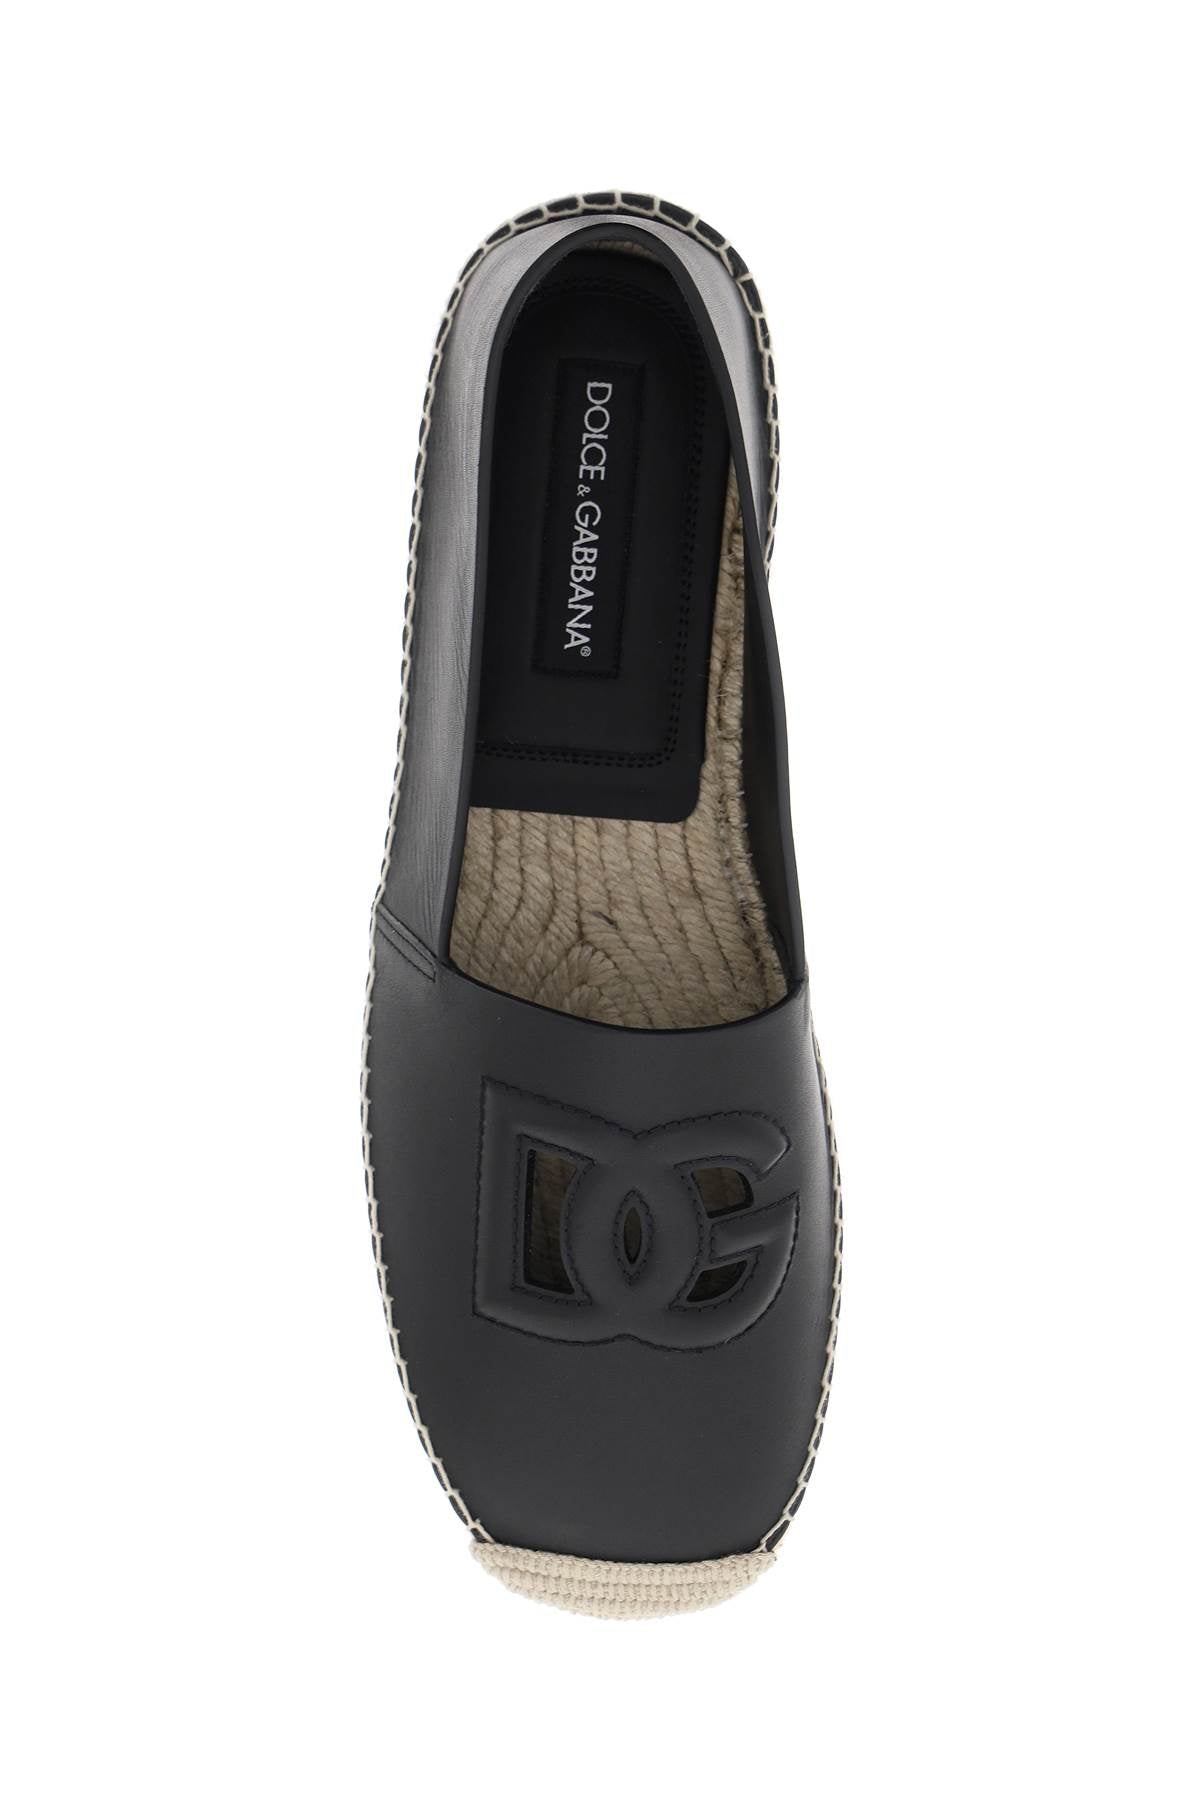 Dolce & Gabbana Dolce & gabbana leather espadrilles with dg logo and